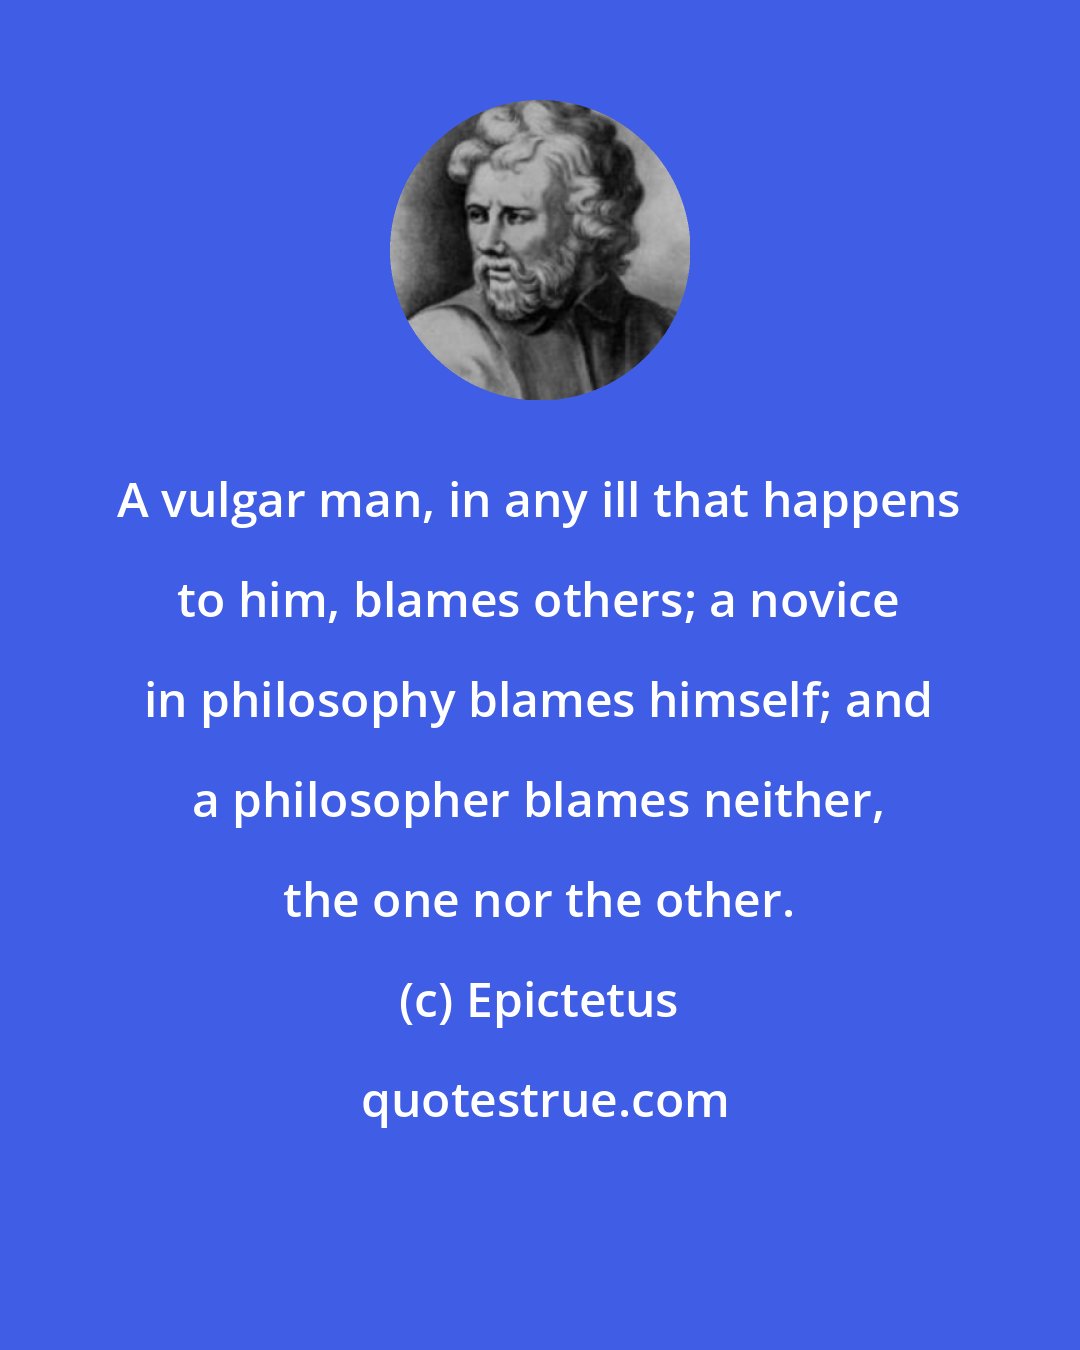 Epictetus: A vulgar man, in any ill that happens to him, blames others; a novice in philosophy blames himself; and a philosopher blames neither, the one nor the other.